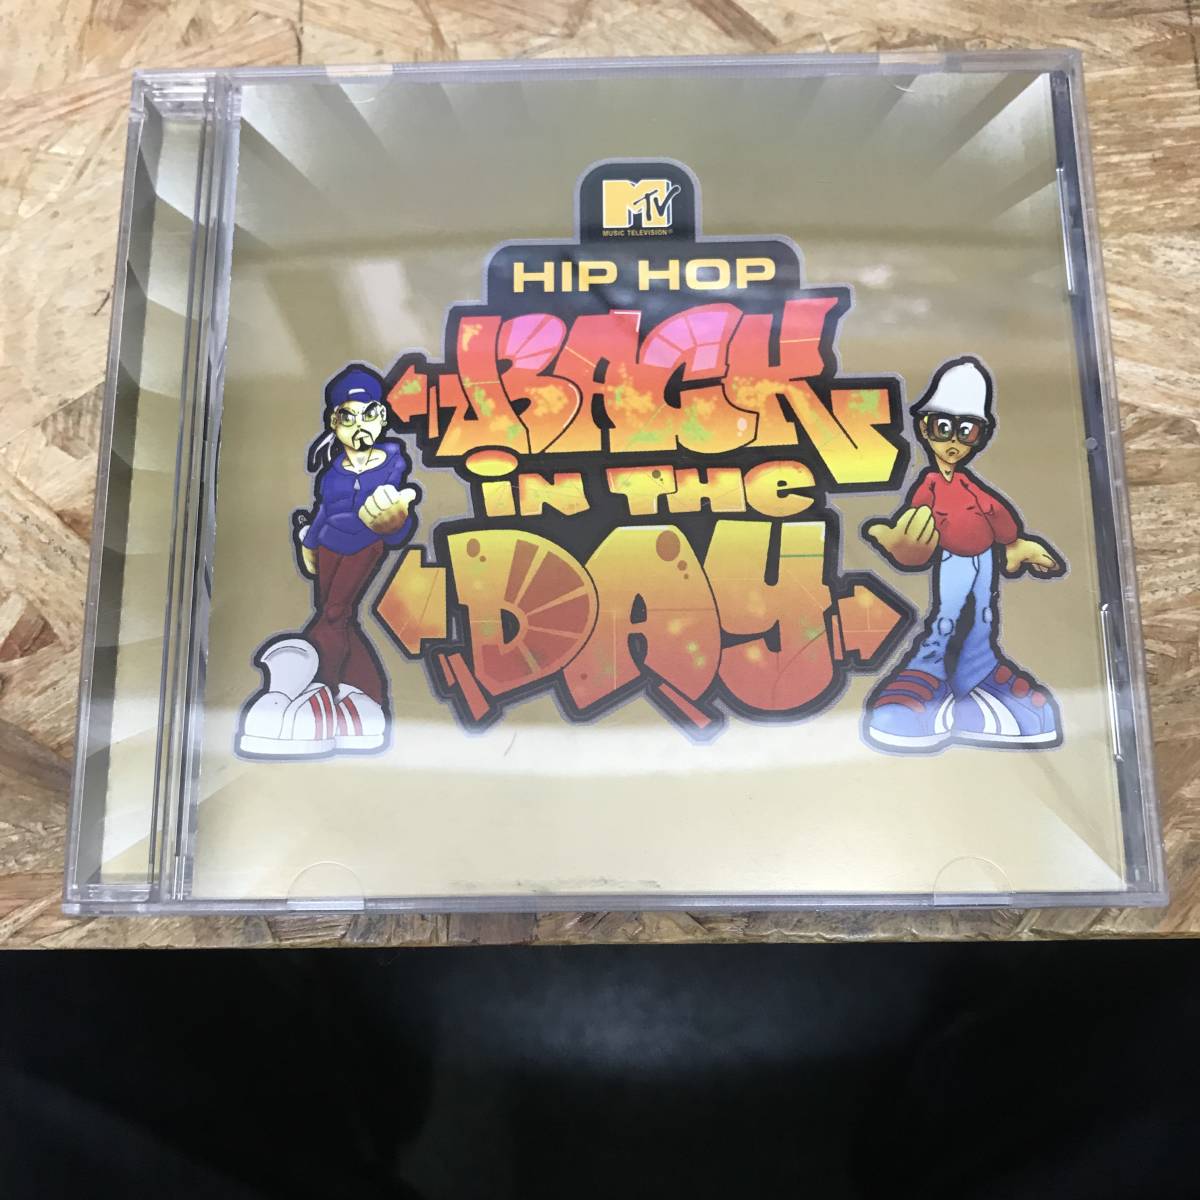 ● HIPHOP,R&B HIP HOP BACK IN THE DAY アルバム CD 中古品_画像1